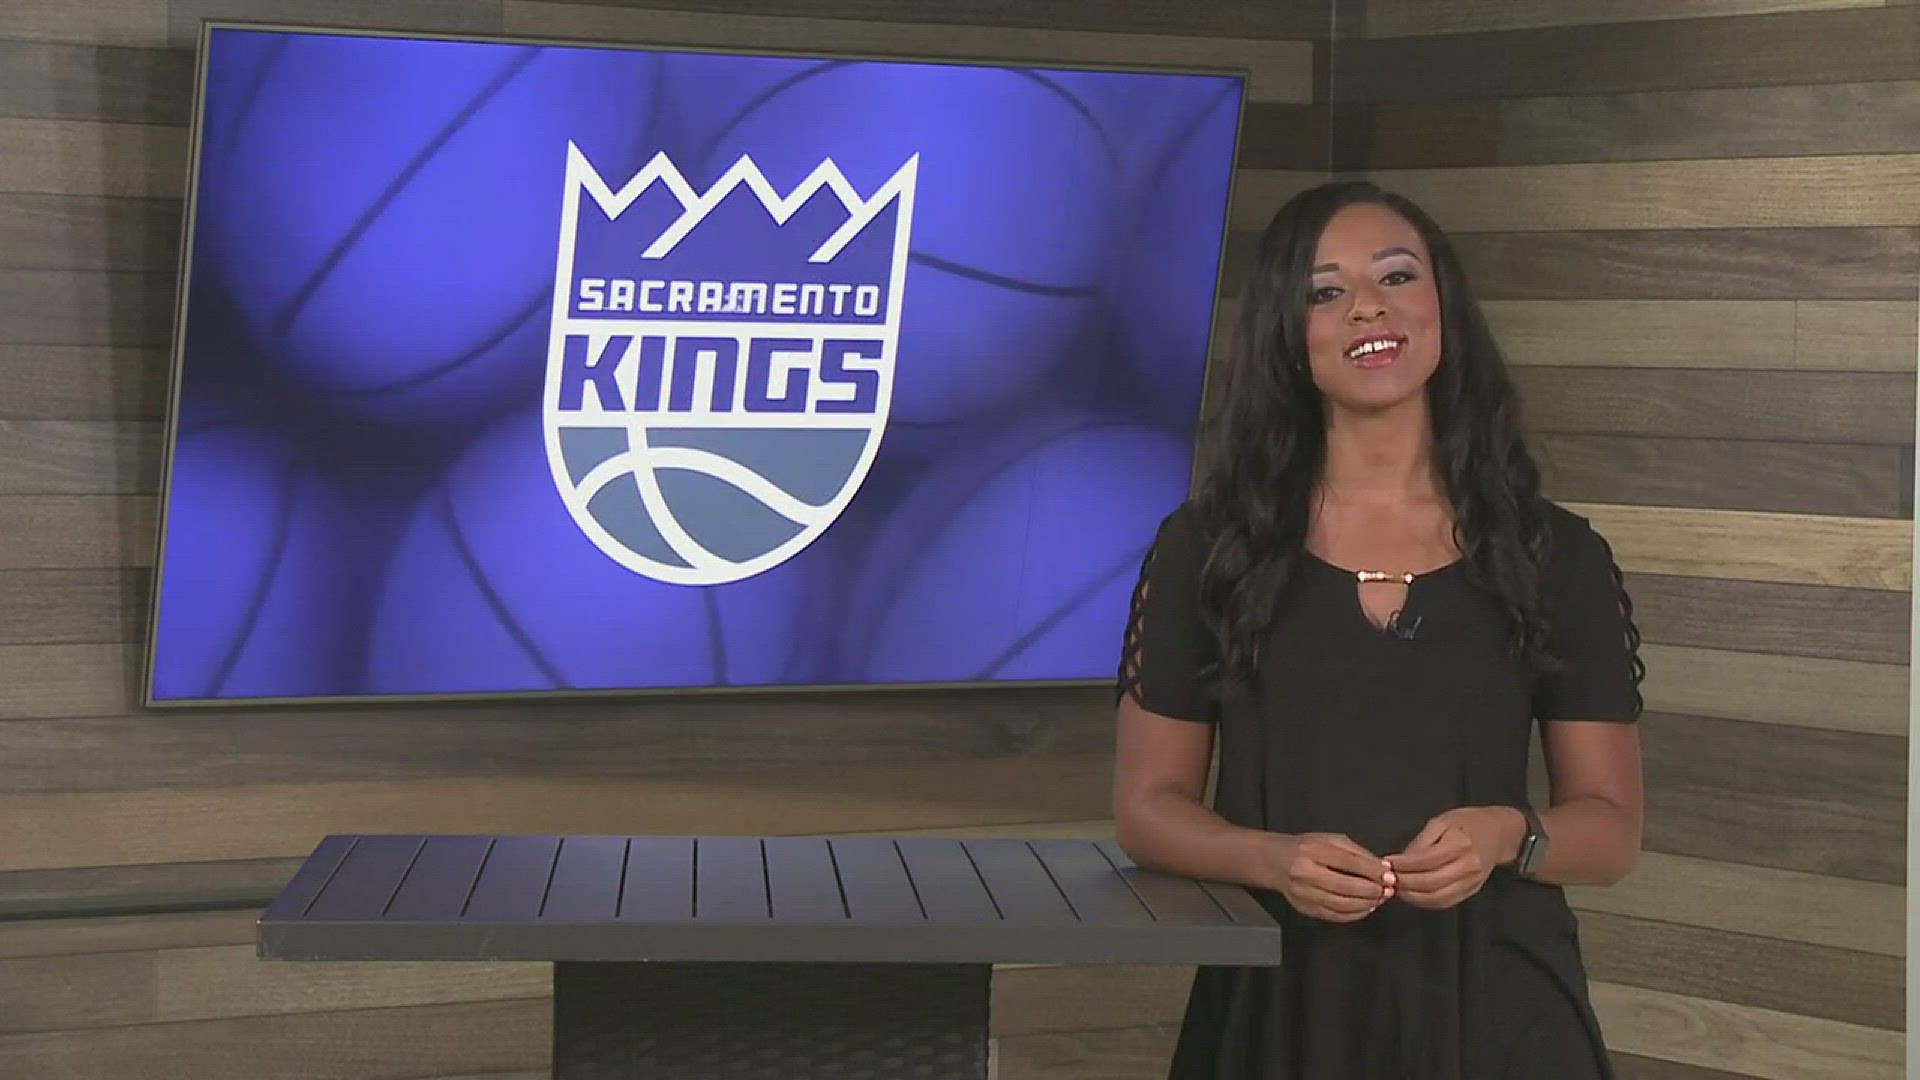 ABC10 sports producer Sean Cunningham is invited to attend the NBA and Nike's unveiling of the Kings new statement edition jerseys in Los Angeles and gets reaction from Nike athlete and Kings rookie De'Aaron Fox.